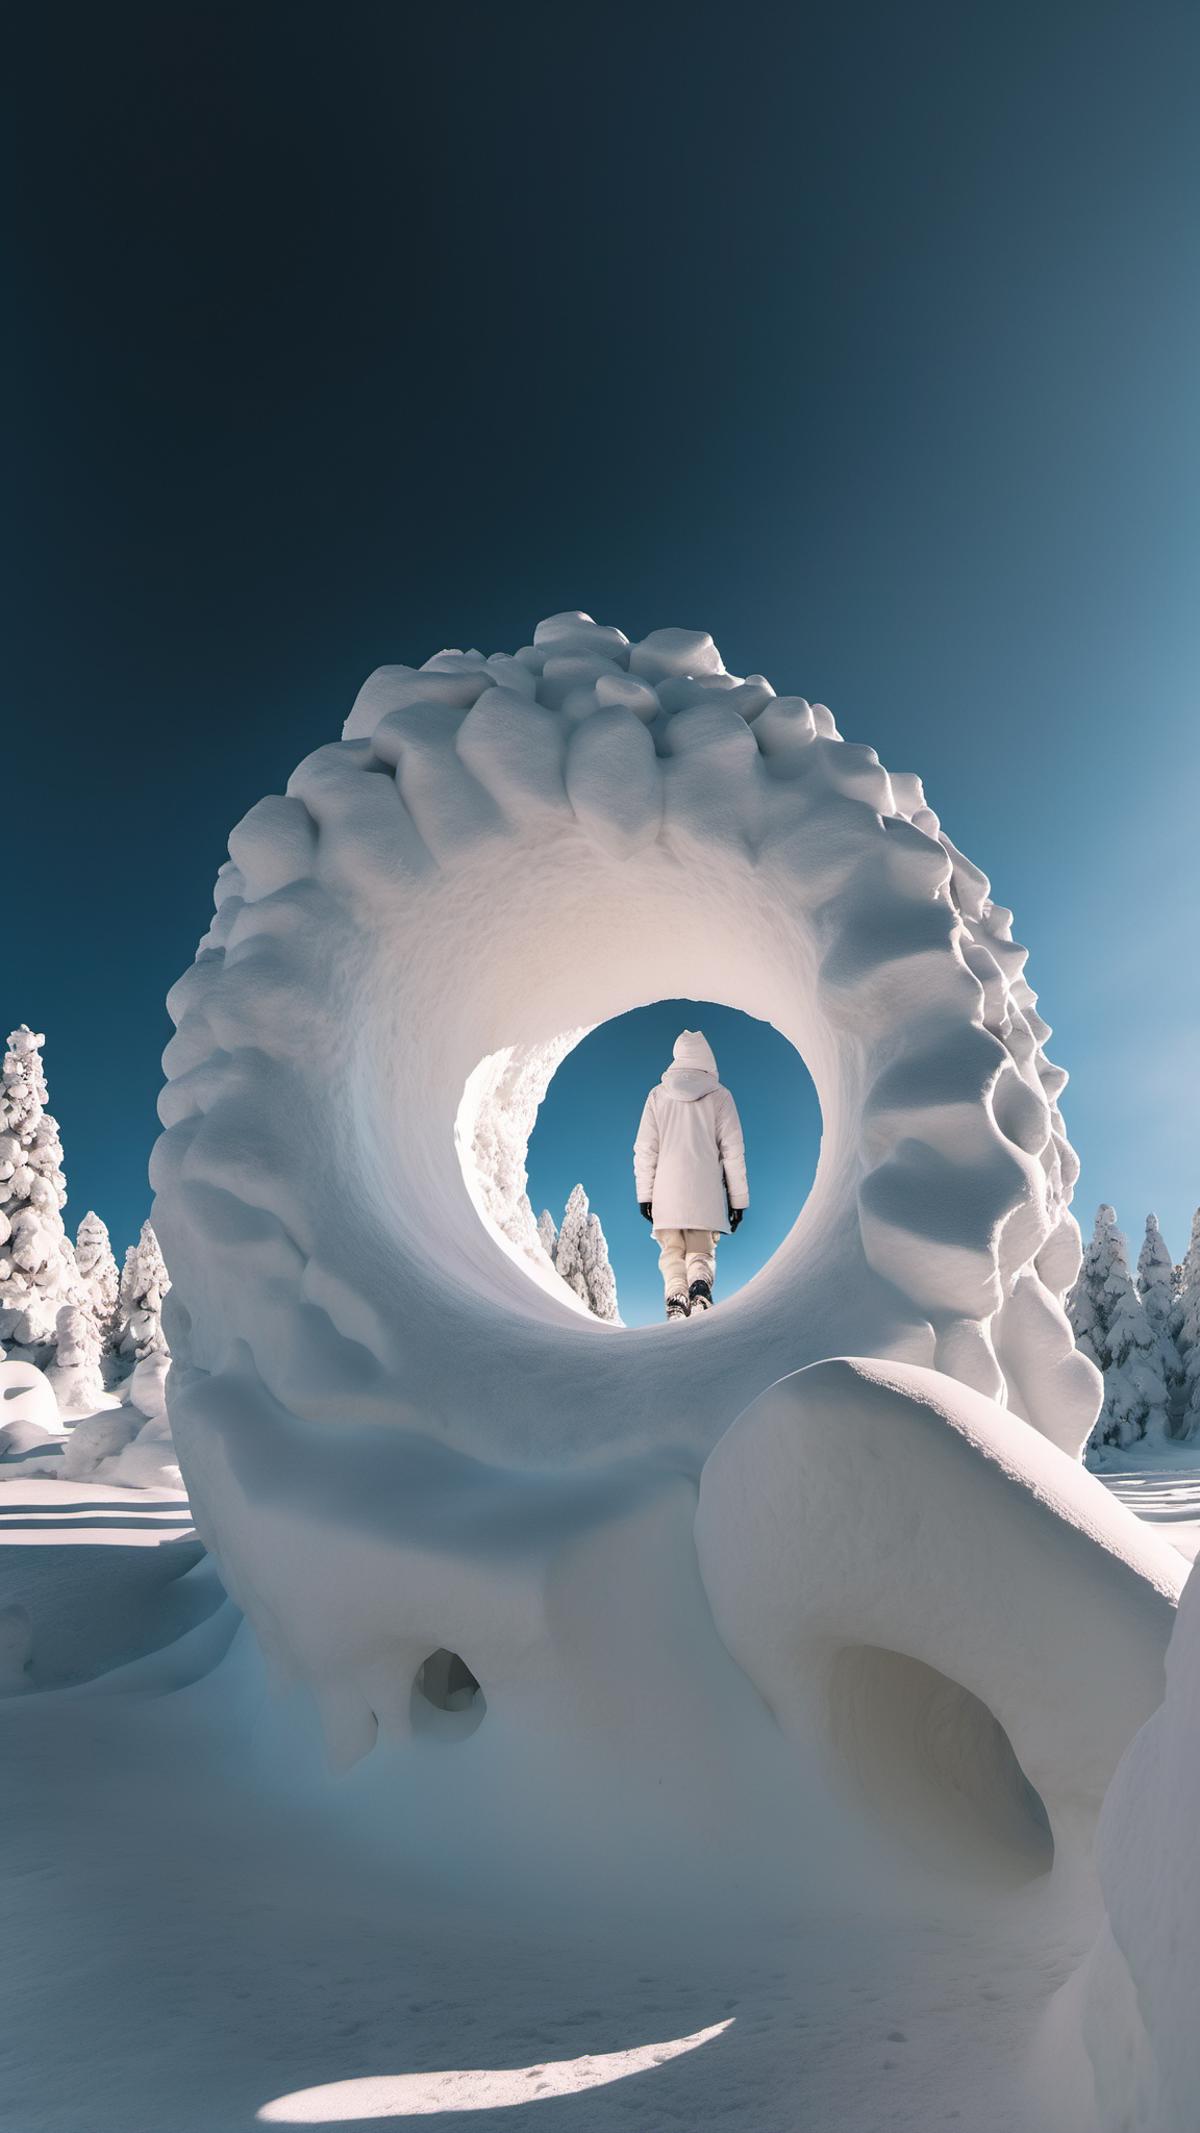 PE Snow Sculpture [Style] image by tonyhs